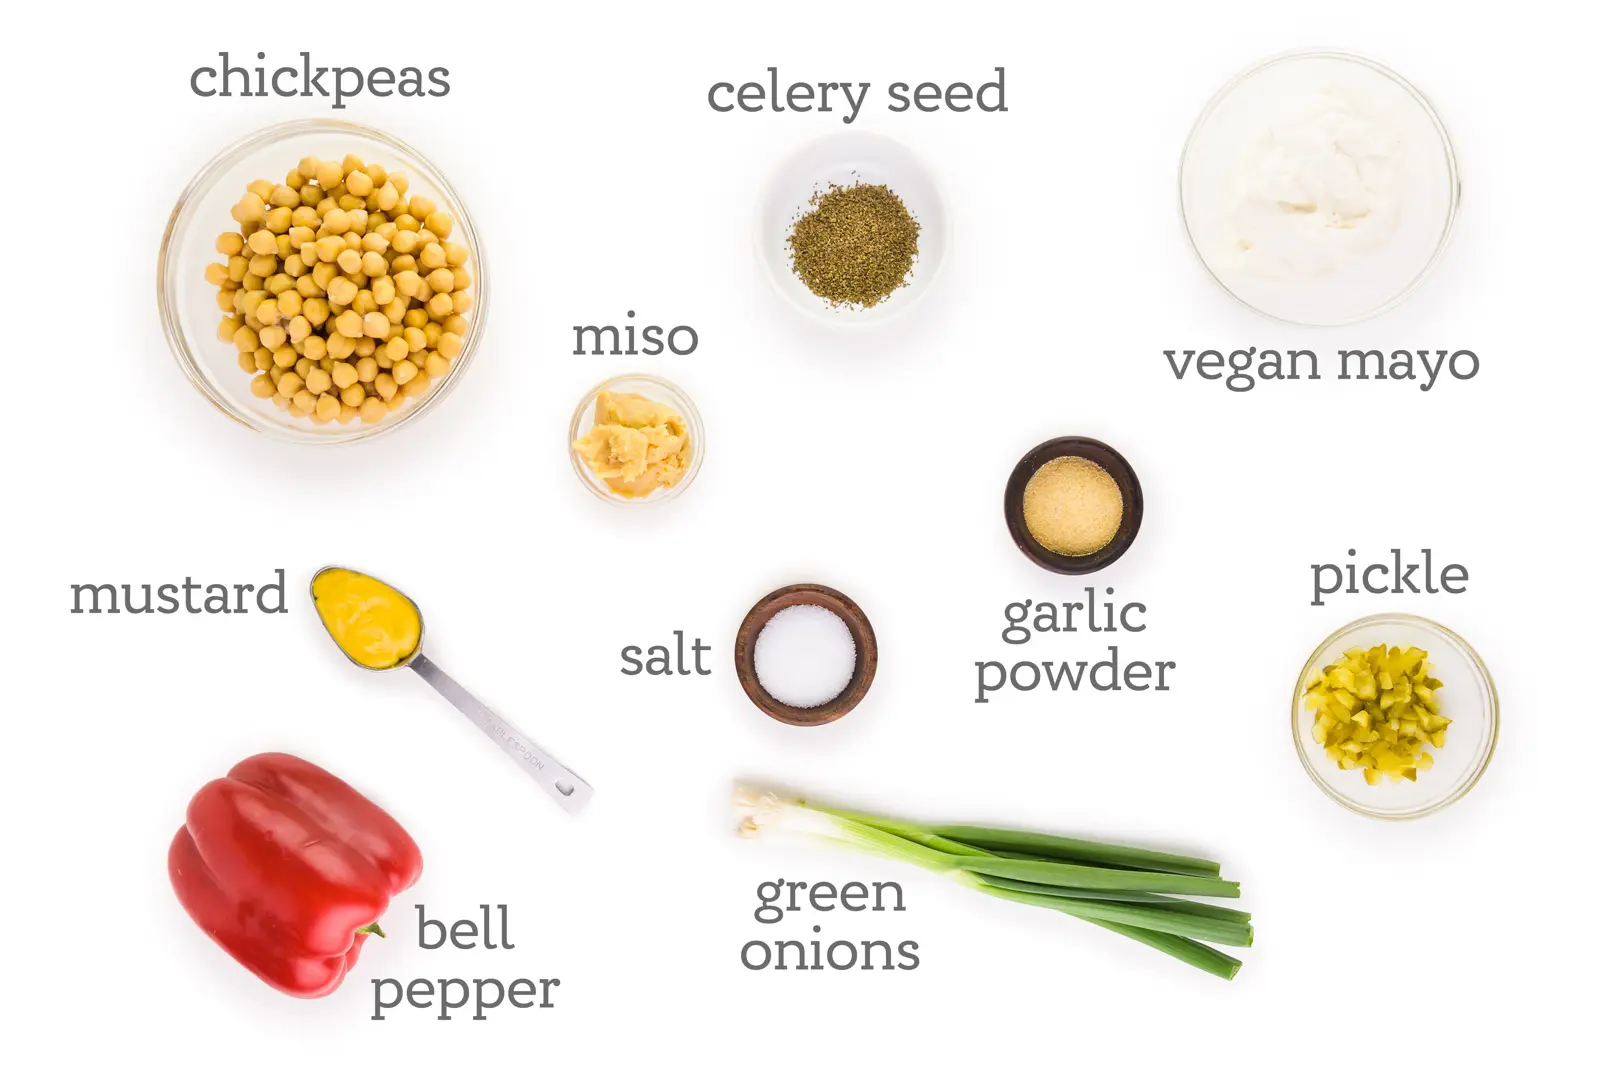 Ingredients are displayed on a white background. The labels read, "chickpeas, miso, celery seed, vegan mayo, garlic powder, pickles, green onions, salt, mustard, and bell pepper."